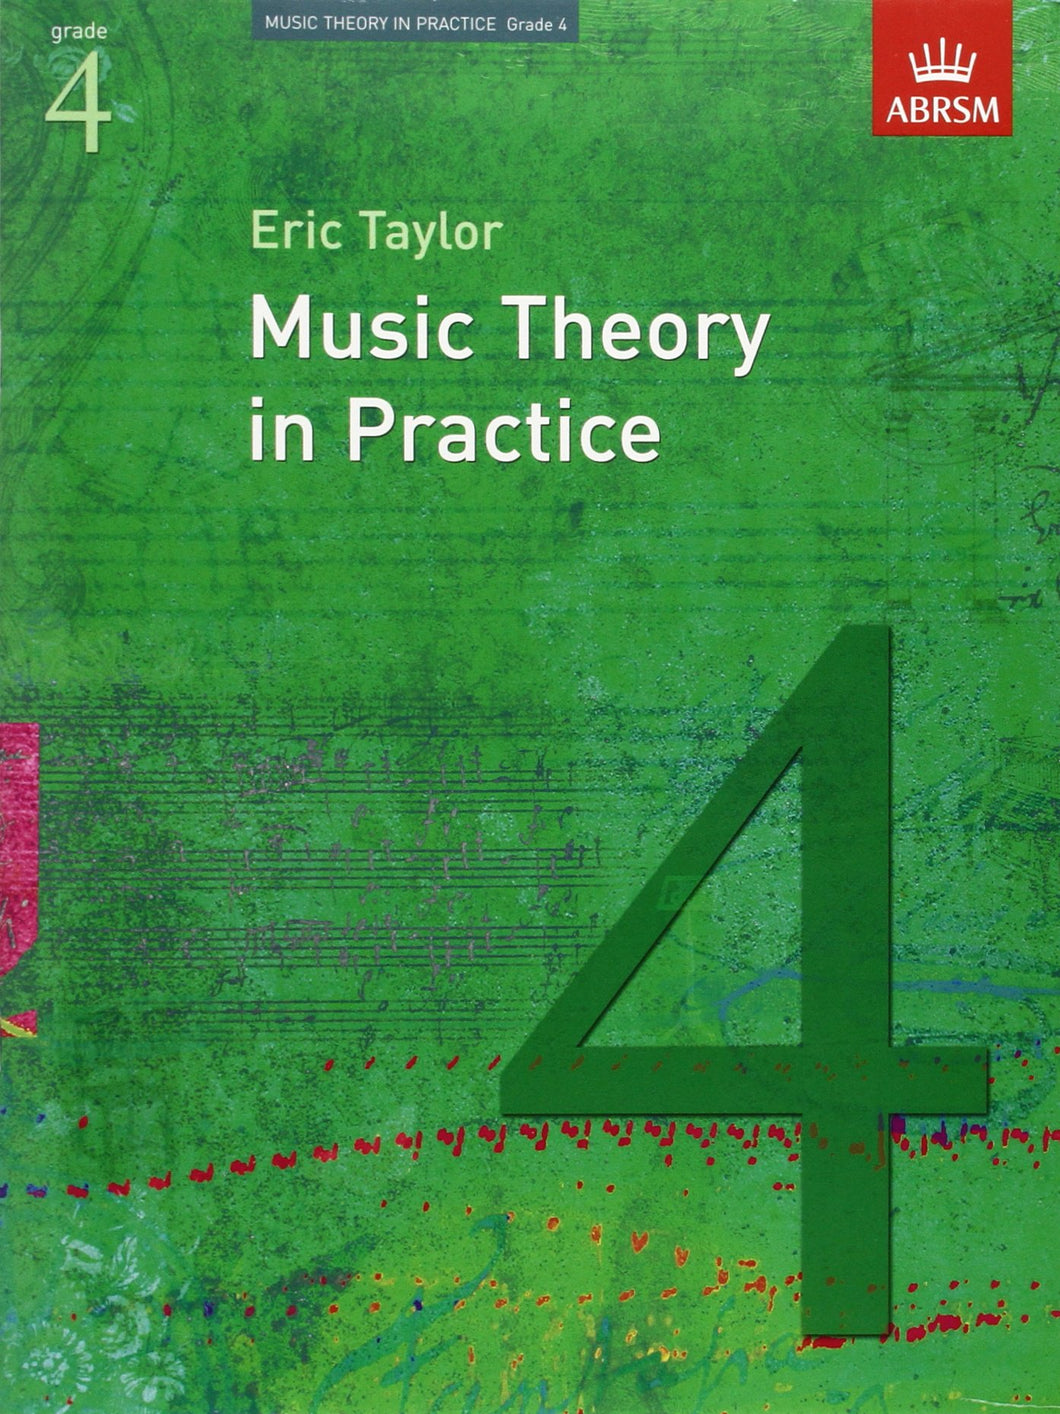 Music Theory In Practice by Eric Taylor Grade 4